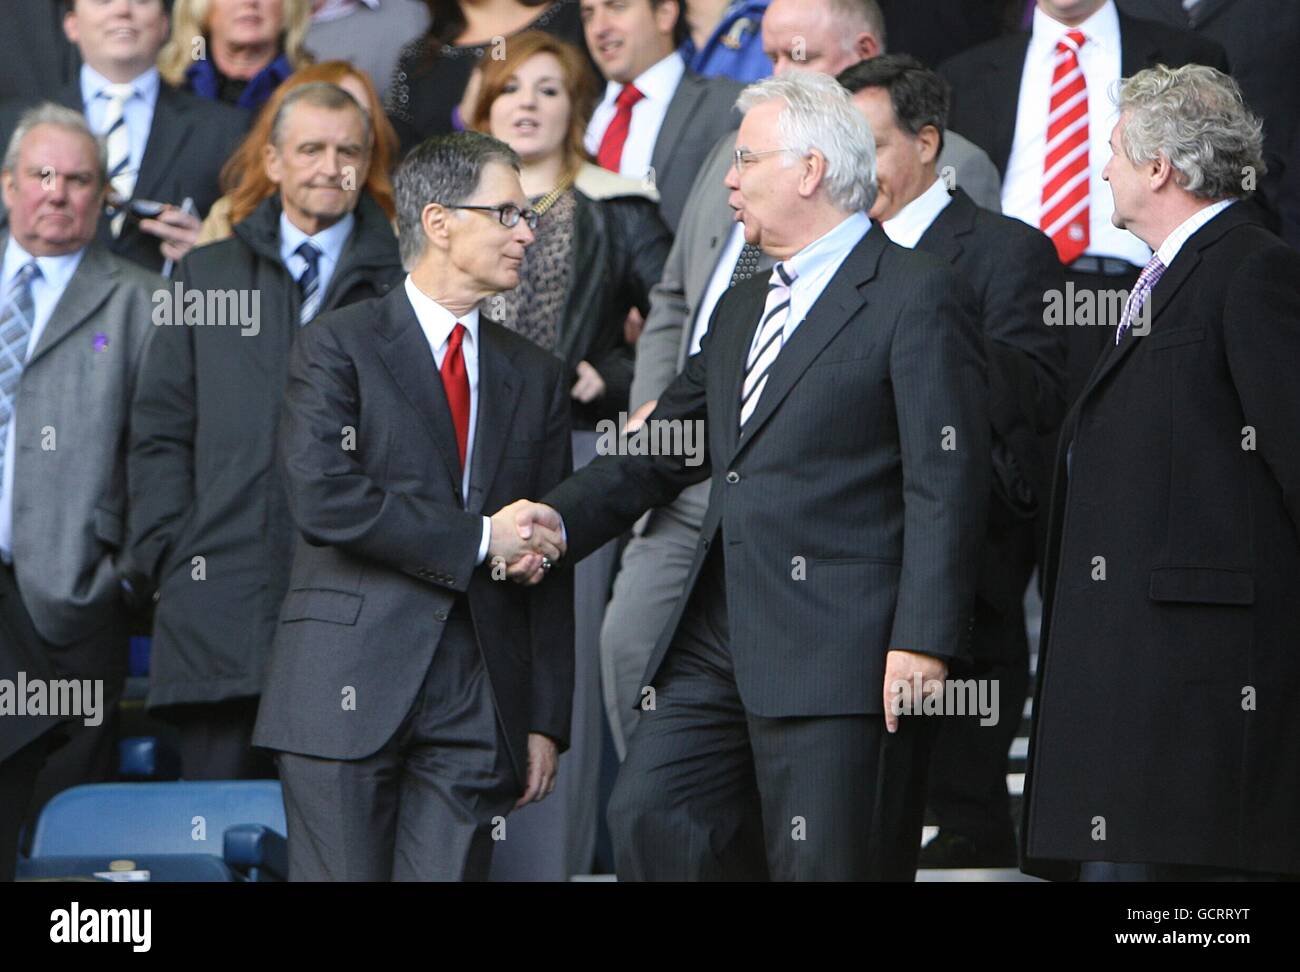 Liverpool FC's new owner John W Henry (left) shakes hands with Everton chairman Bill Kenwright in the stands Stock Photo